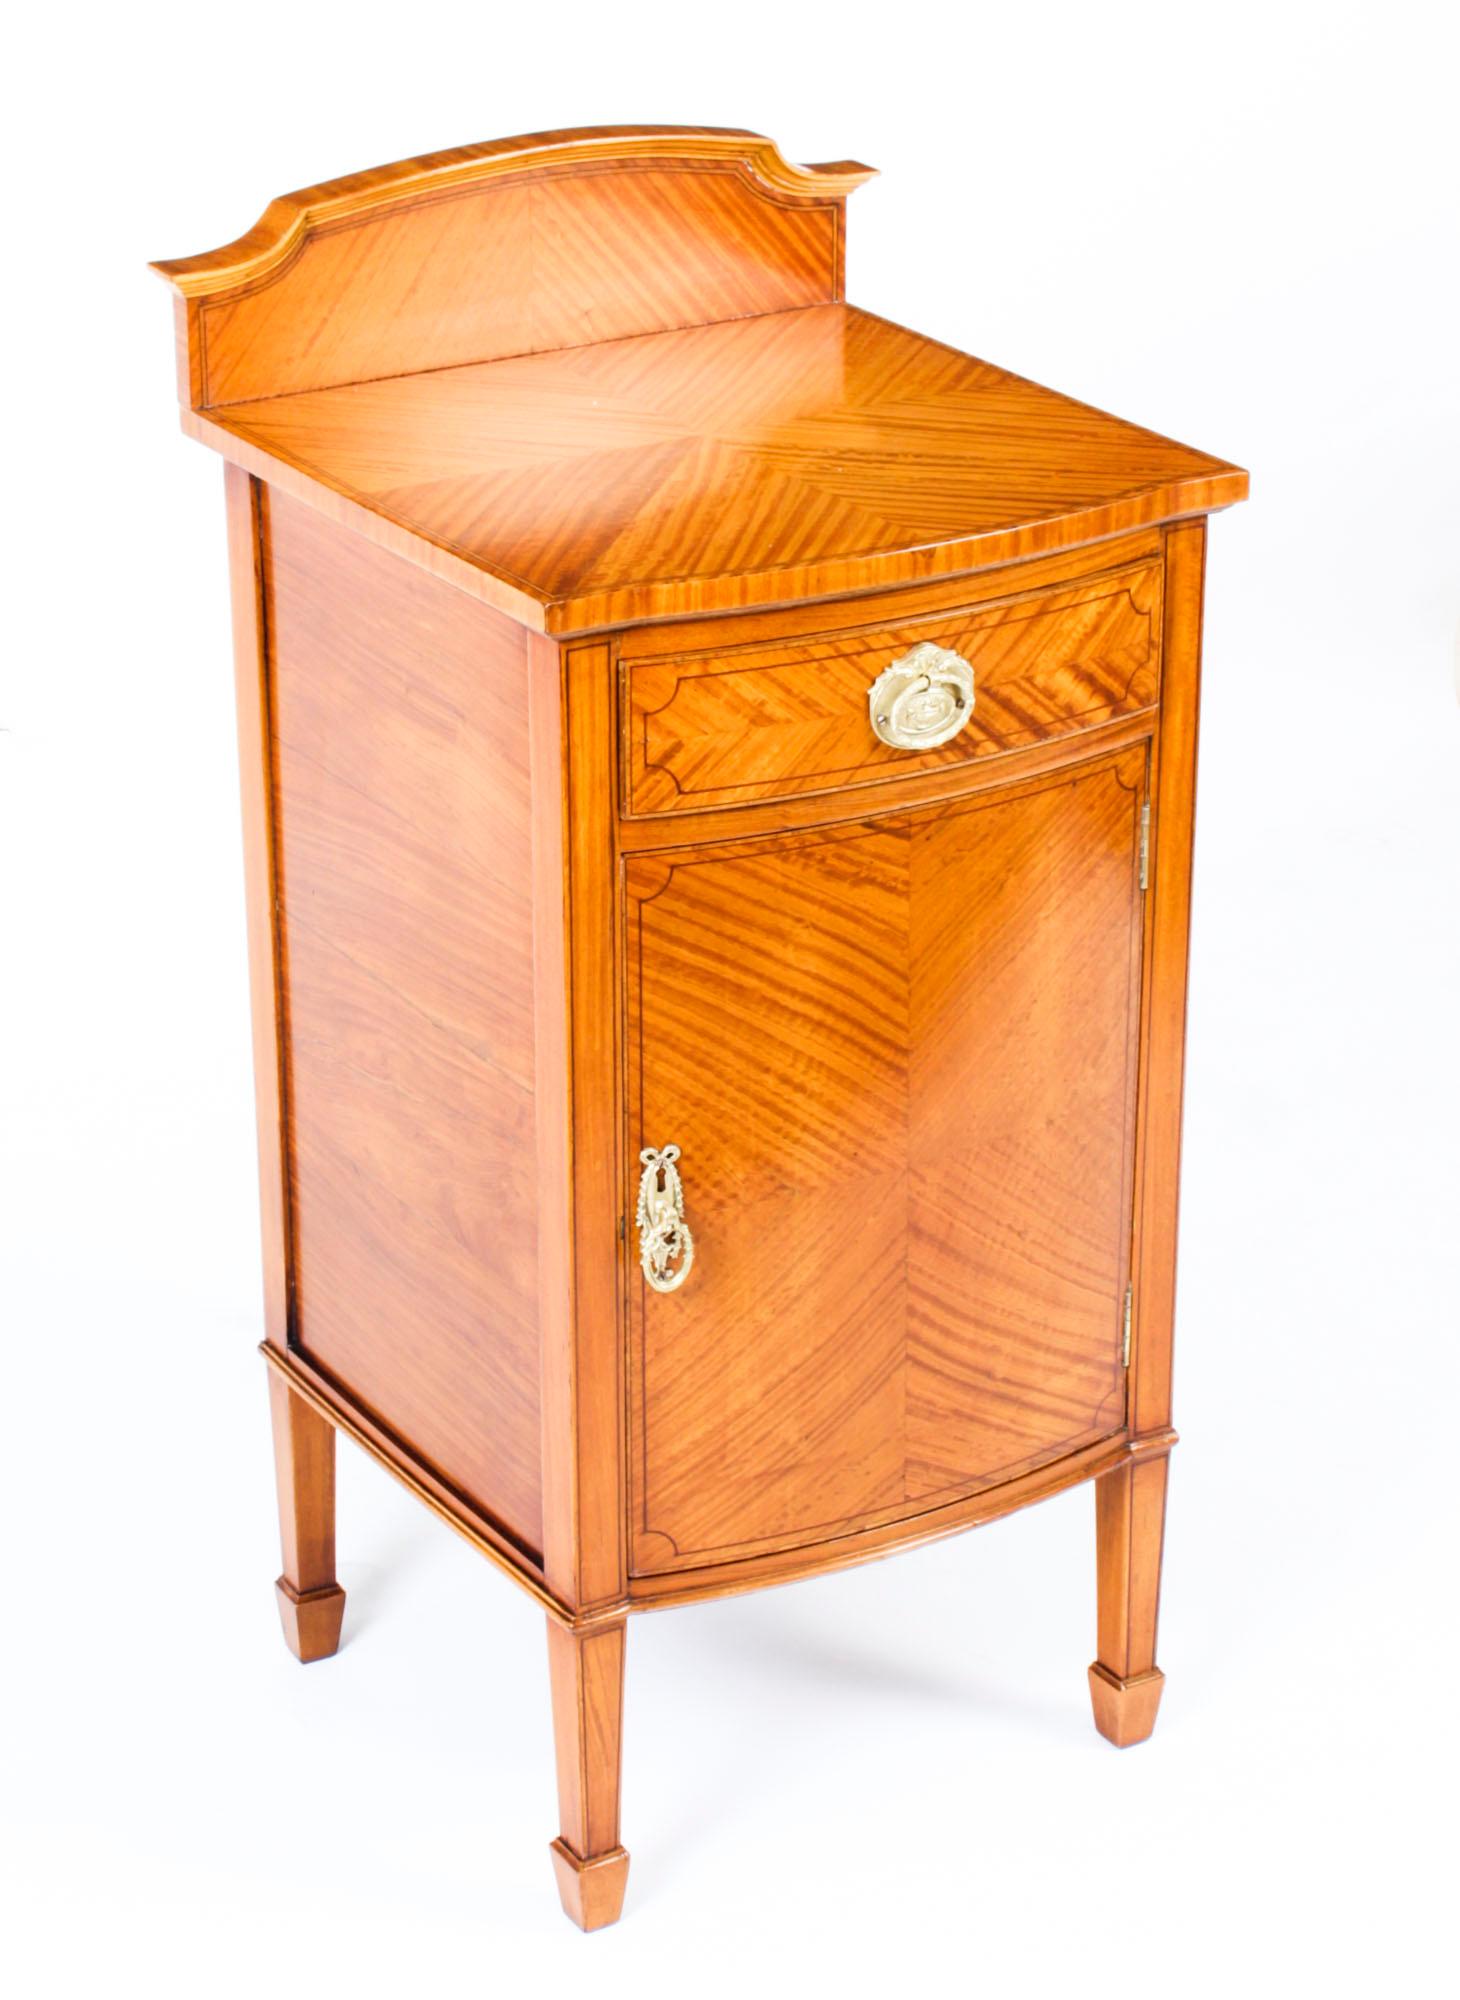 Antique Satinwood and Inlaid Bedside Cabinet, 19th Century For Sale 8